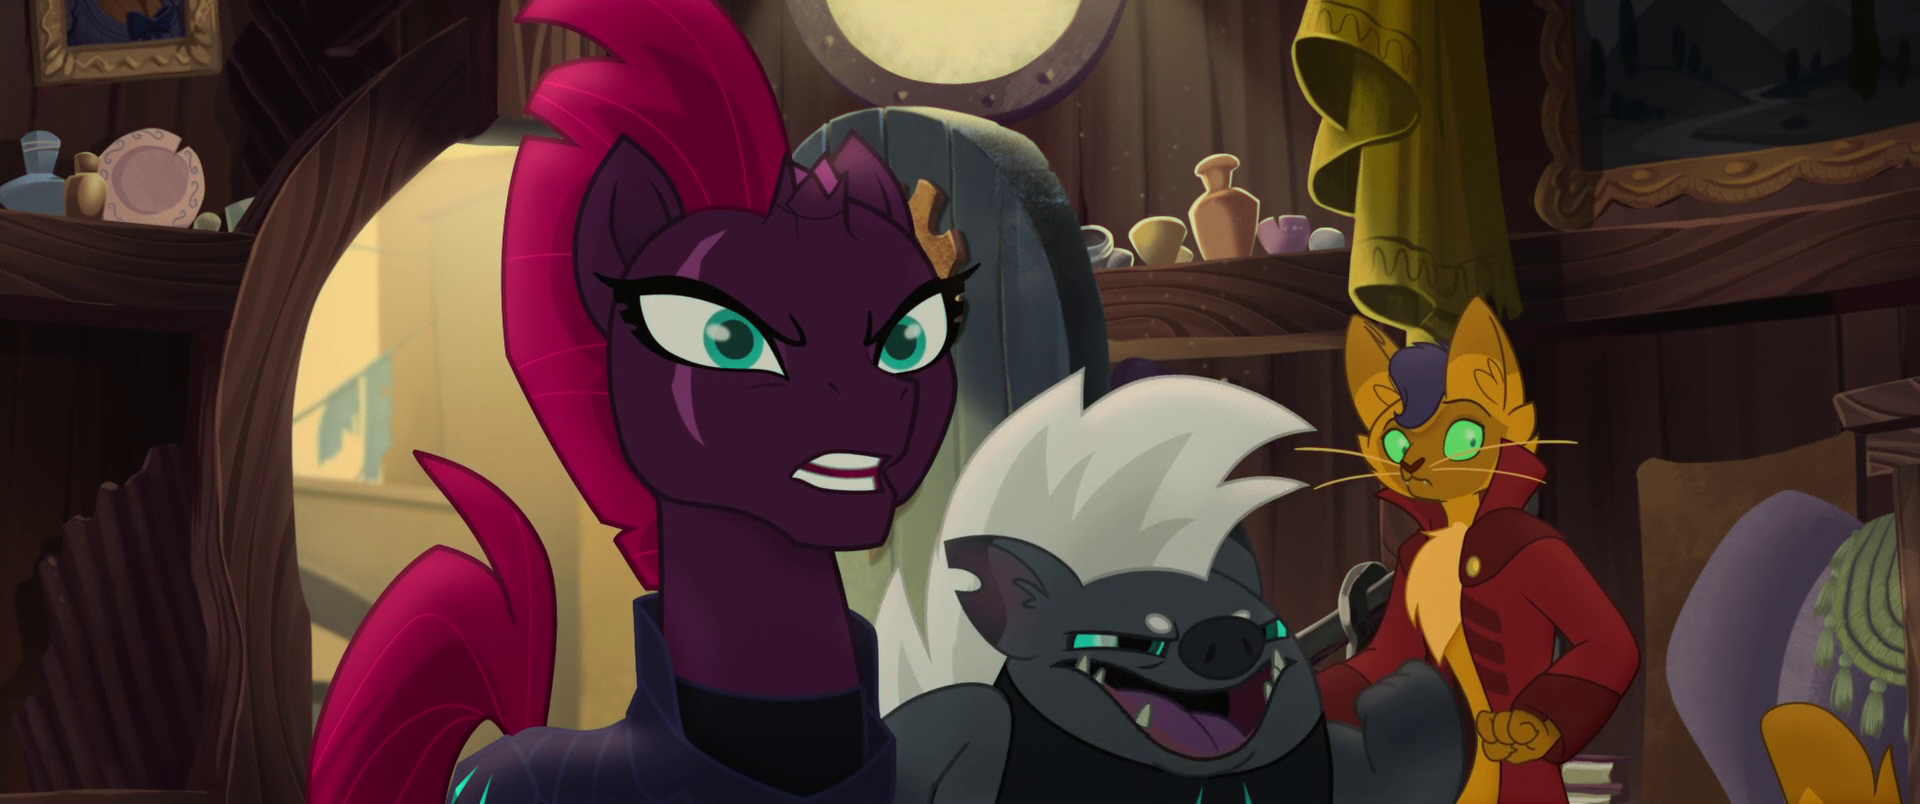 Image - Grubber "you gonna be scared now, ponies!" MLPTM 